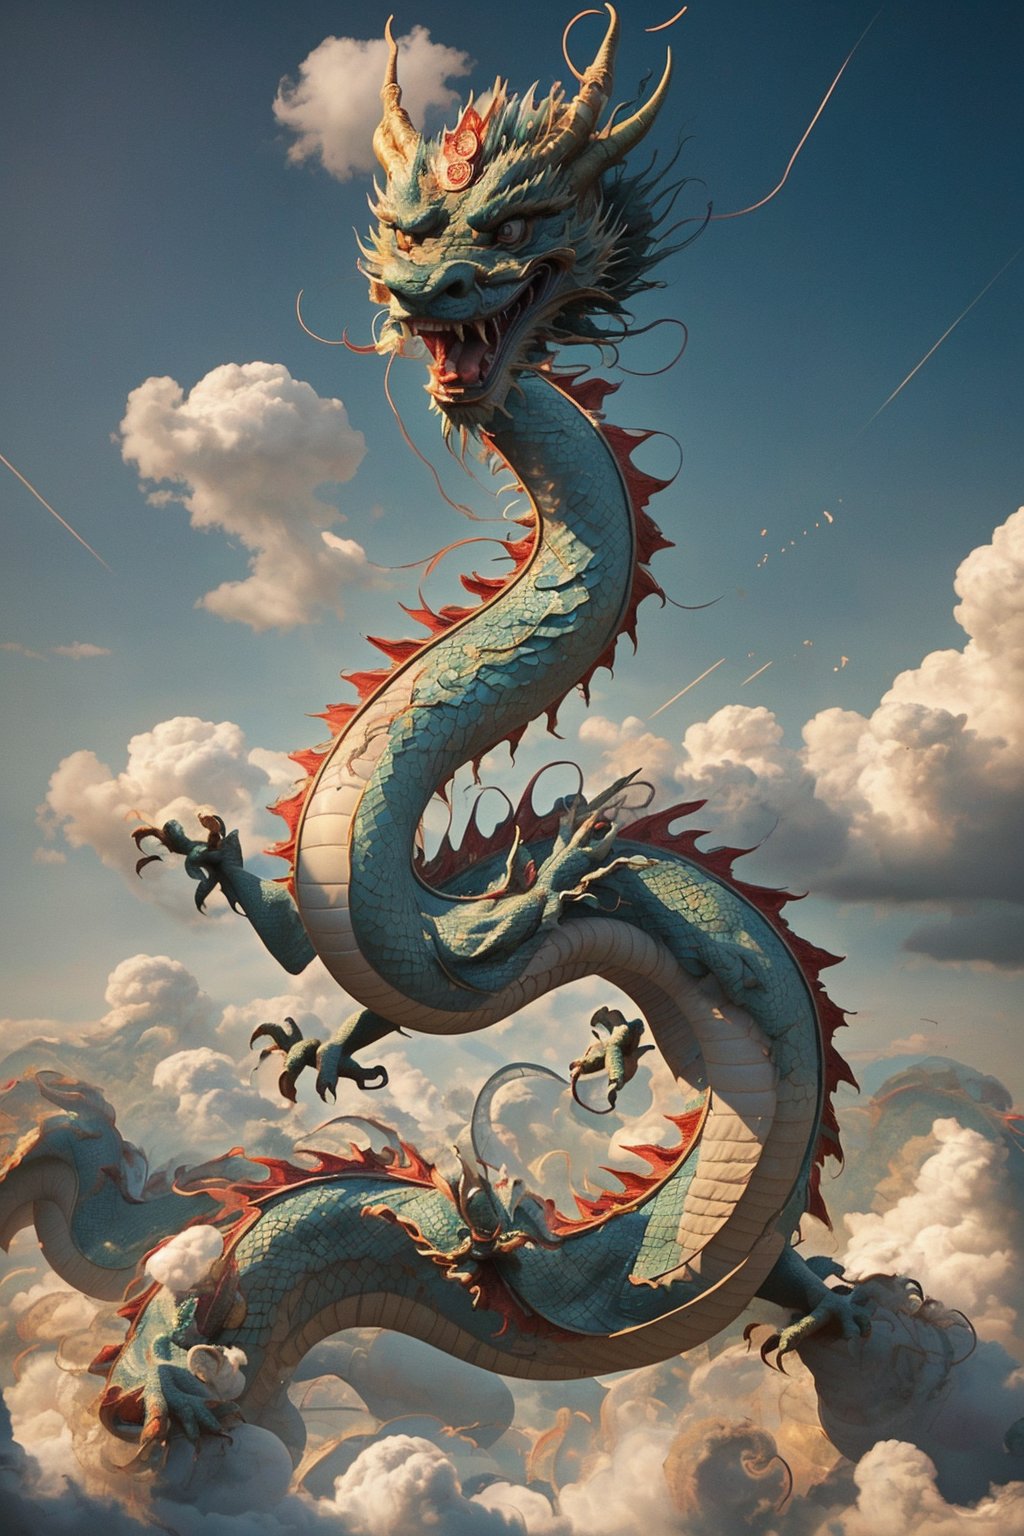 dragon-themed,dragonyear,
In the vast blue sky, the East Chinese dragon soars with immense power. Its sinuous body glimmers with iridescent scales as it gracefully glides through the air.  clouds part and the ground trembles, a symbol of its awe-inspiring might and dominance over the heavens.